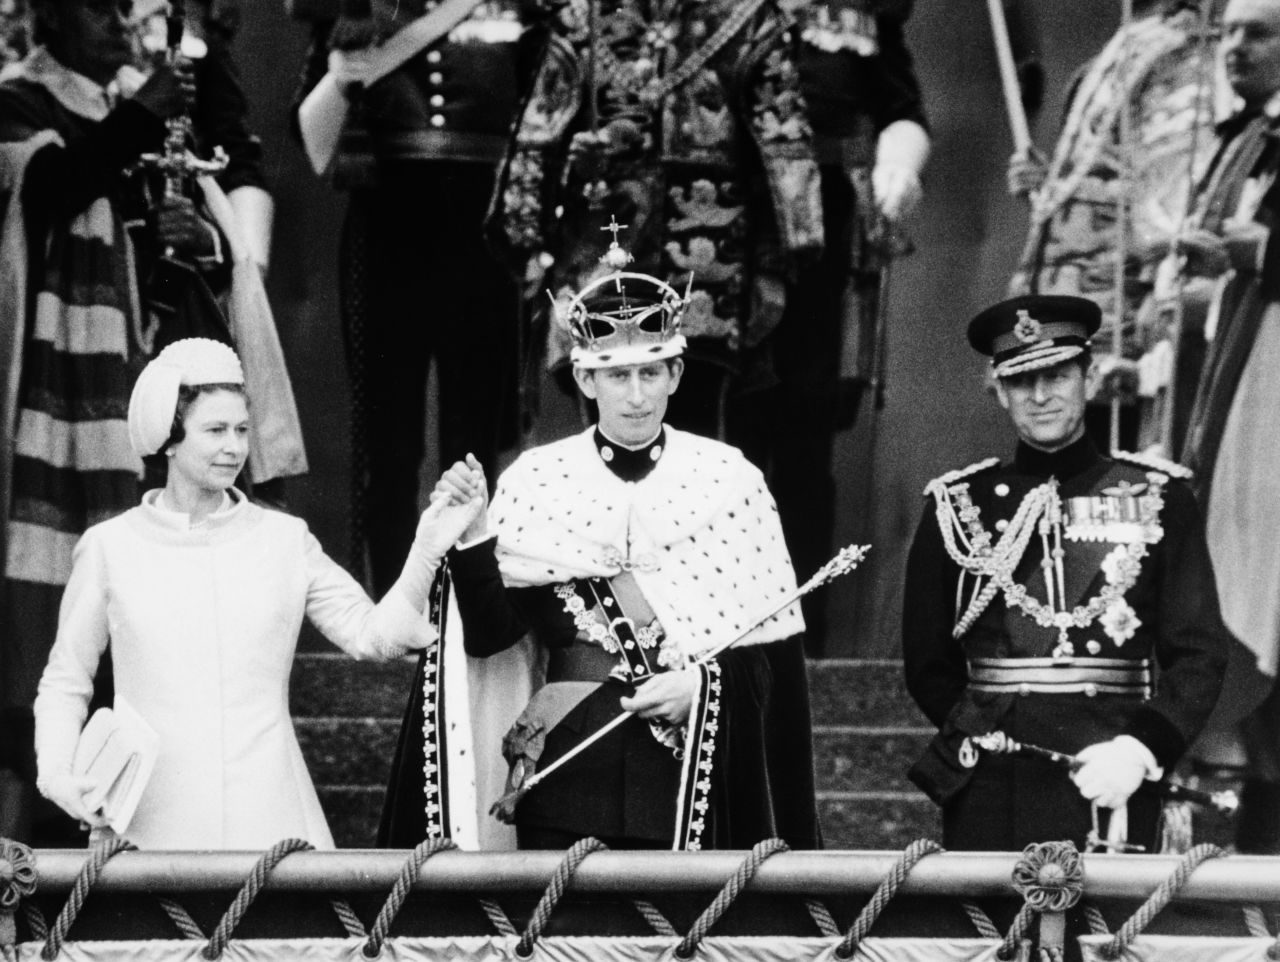 Queen Elizabeth II presents Charles to the people of Wales after his investiture as the Prince of Wales in July 1969.